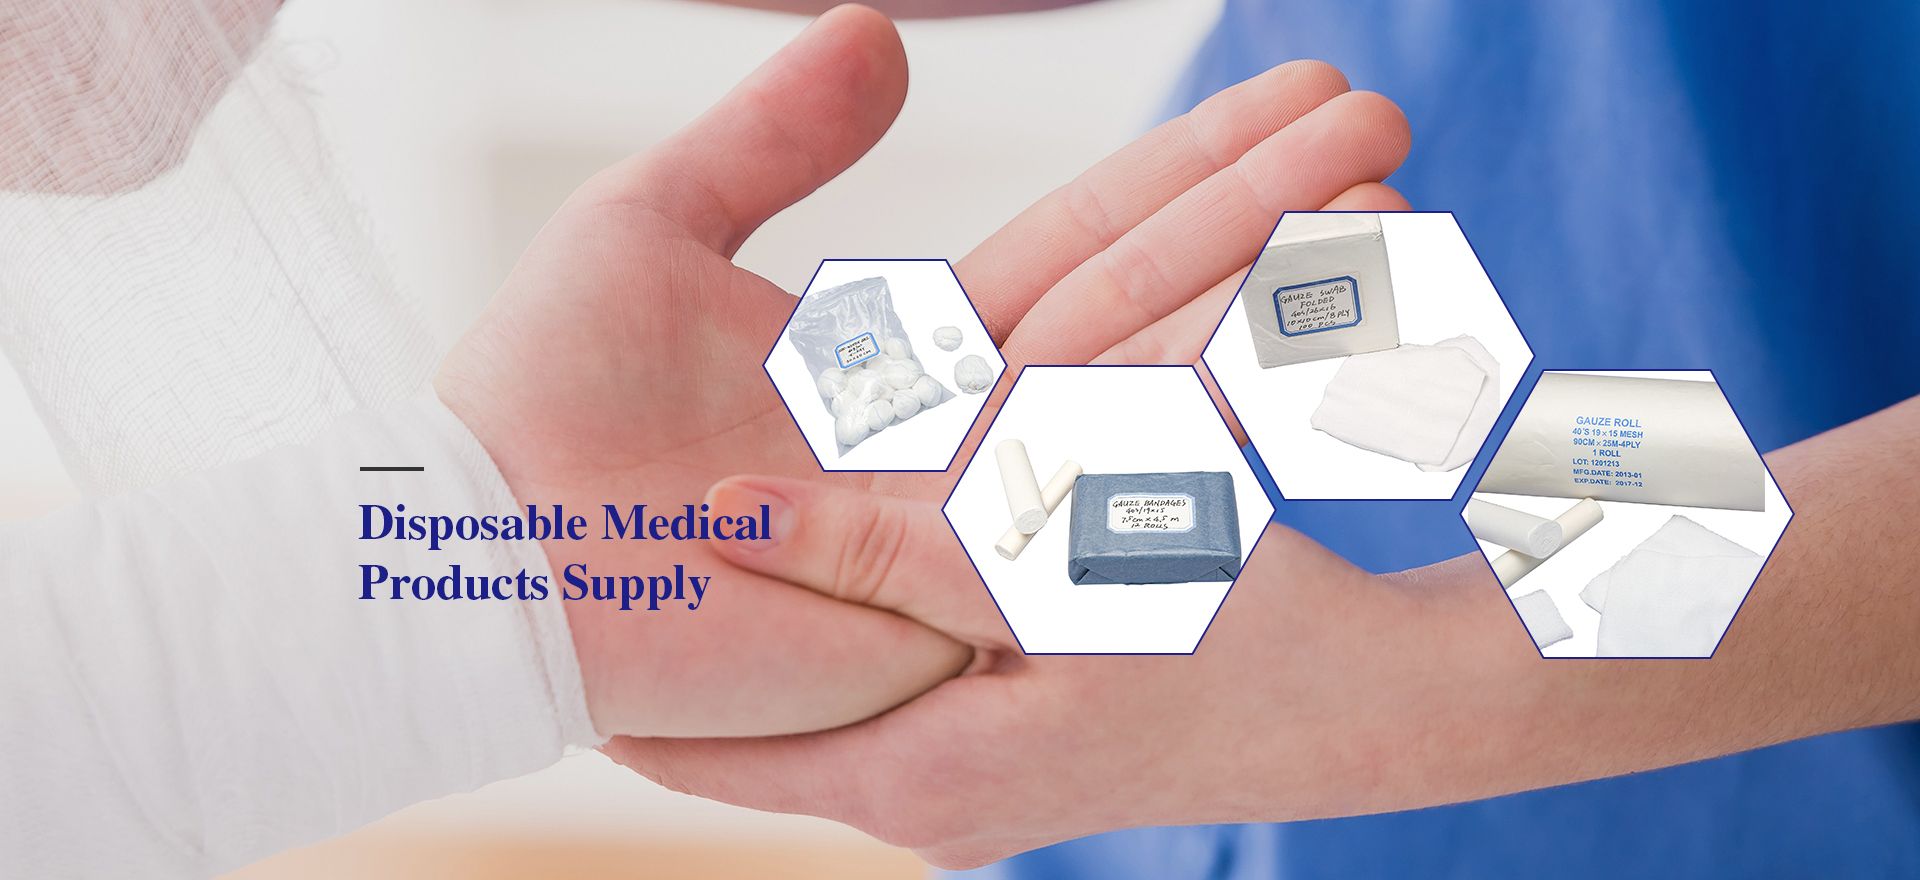 Disposable Medical Products Supply